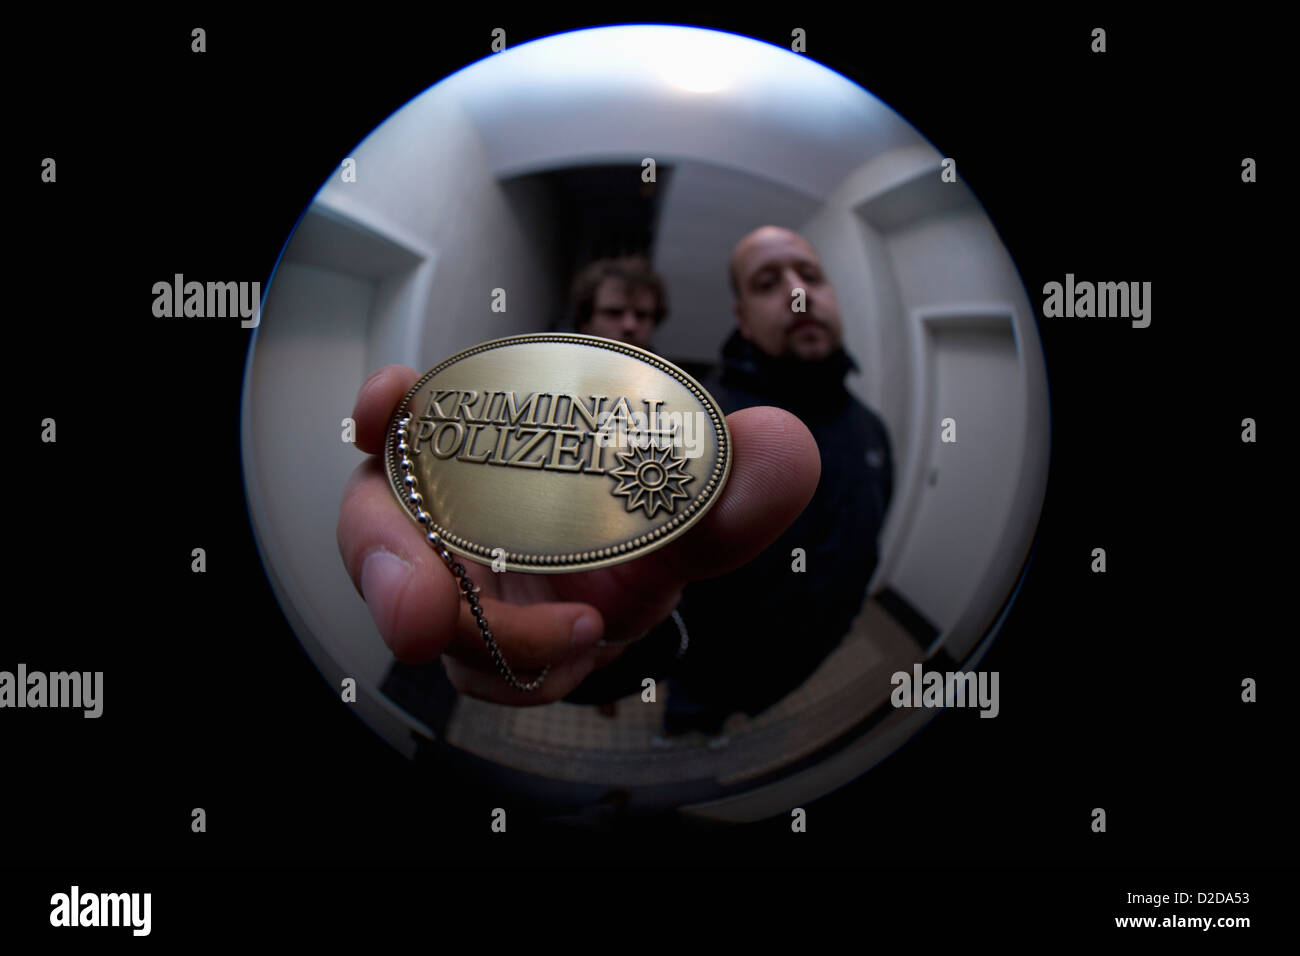 Two detectives showing a crime police (German: Kriminal Polizei) badge to a peephole Stock Photo